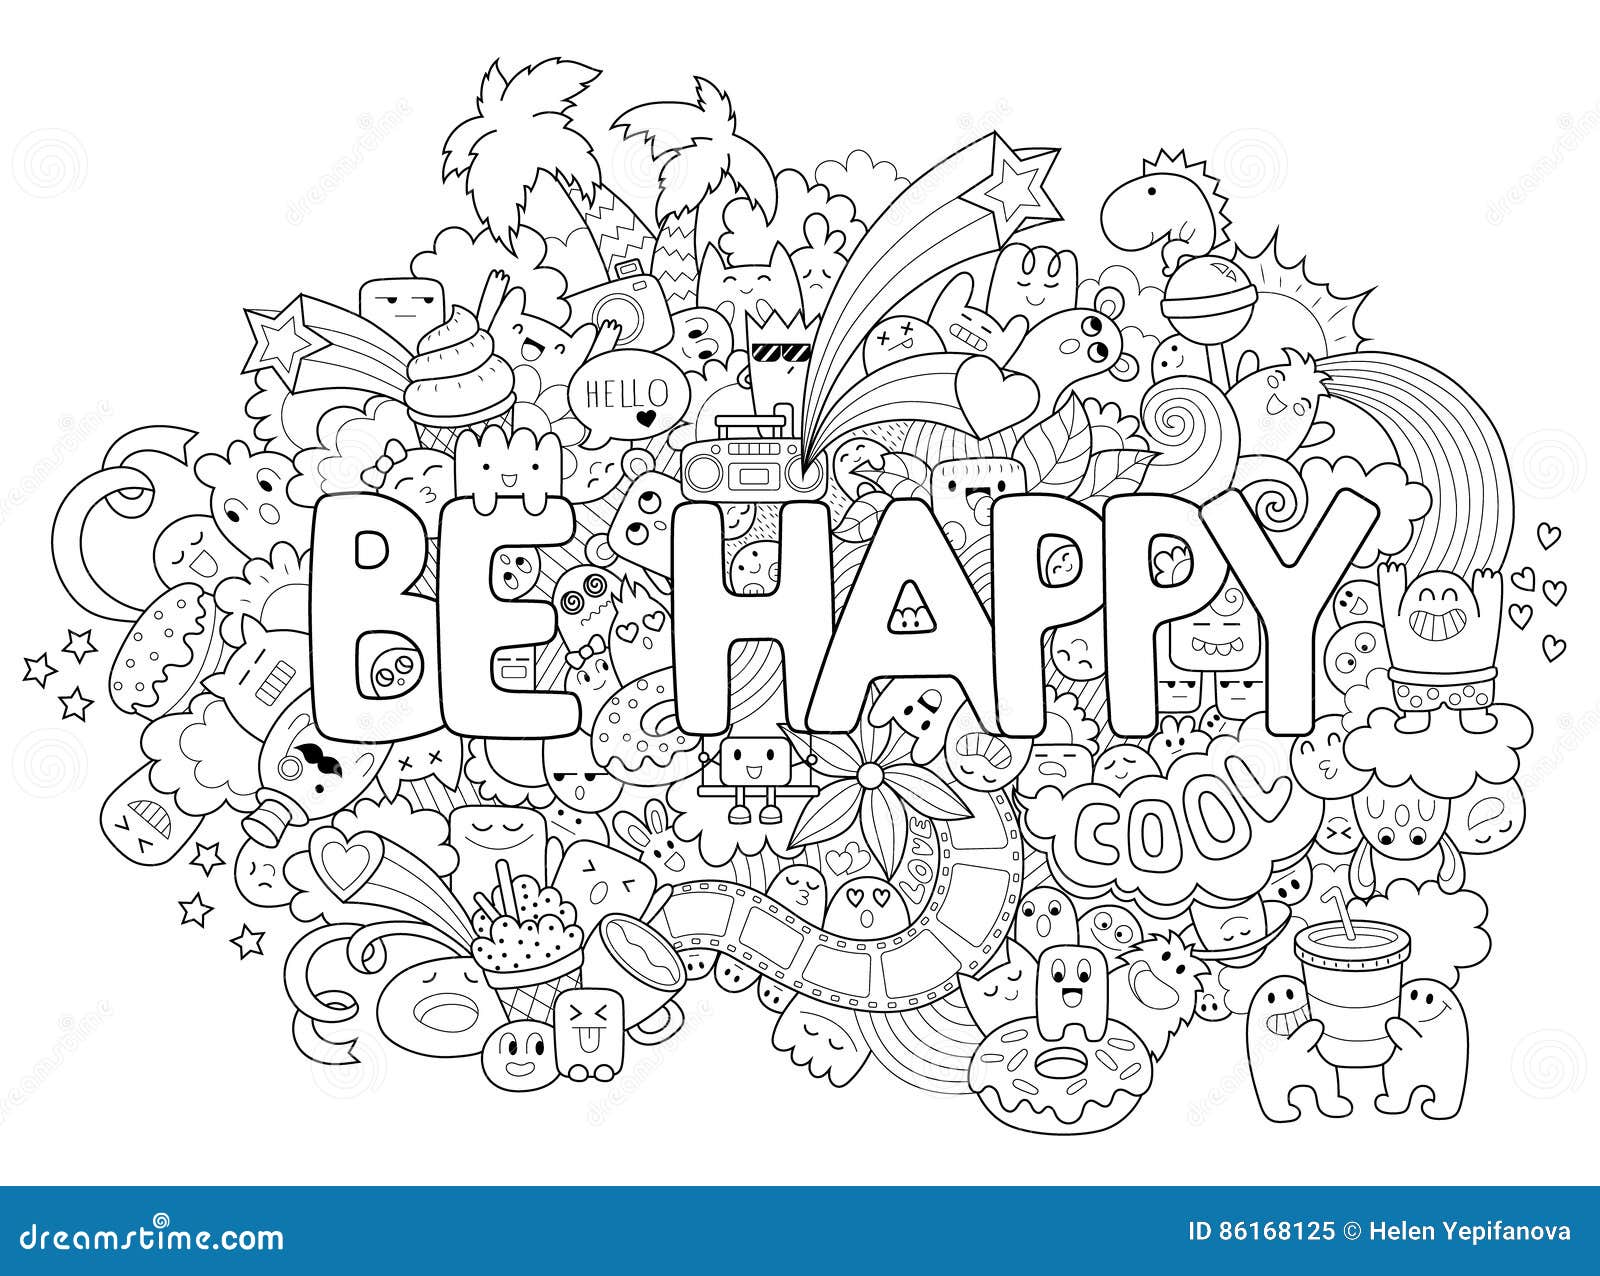 Printable coloring page for adults with cartoon characters hand drawn vector illustration freehand sketch for adult stock vector